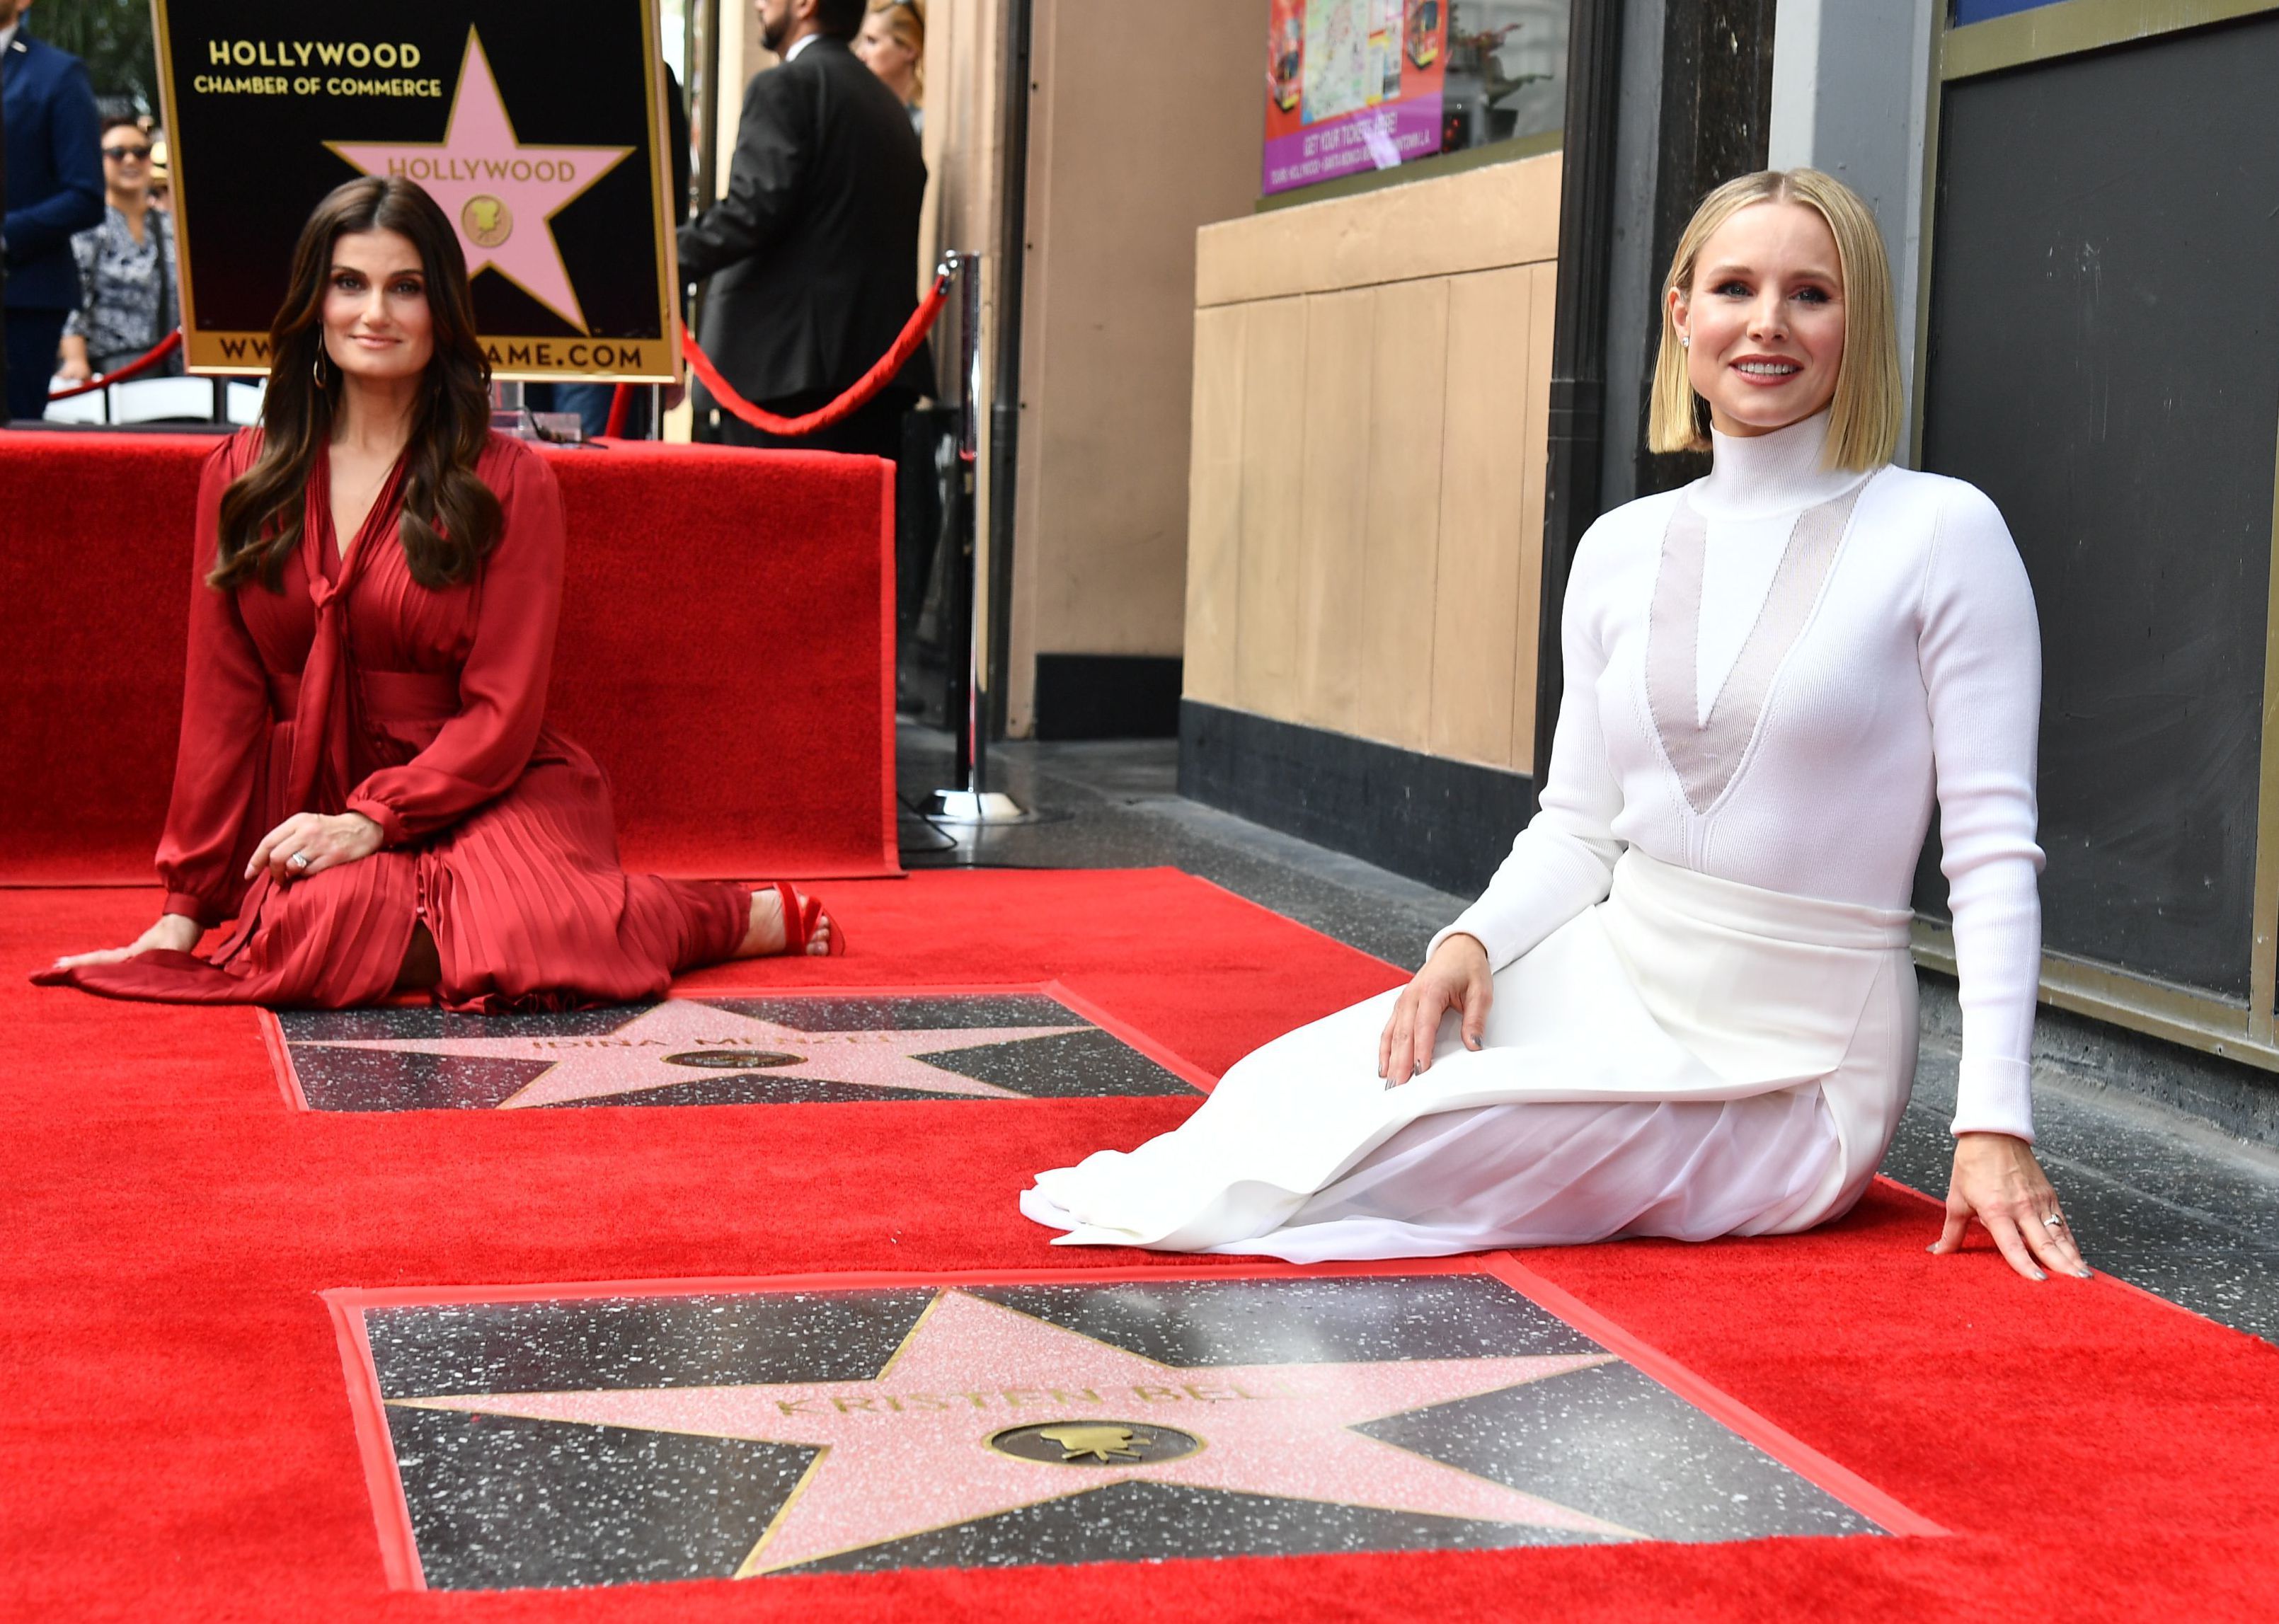 Best photos from celebs' Hollywood Walk of Fame star ceremonies